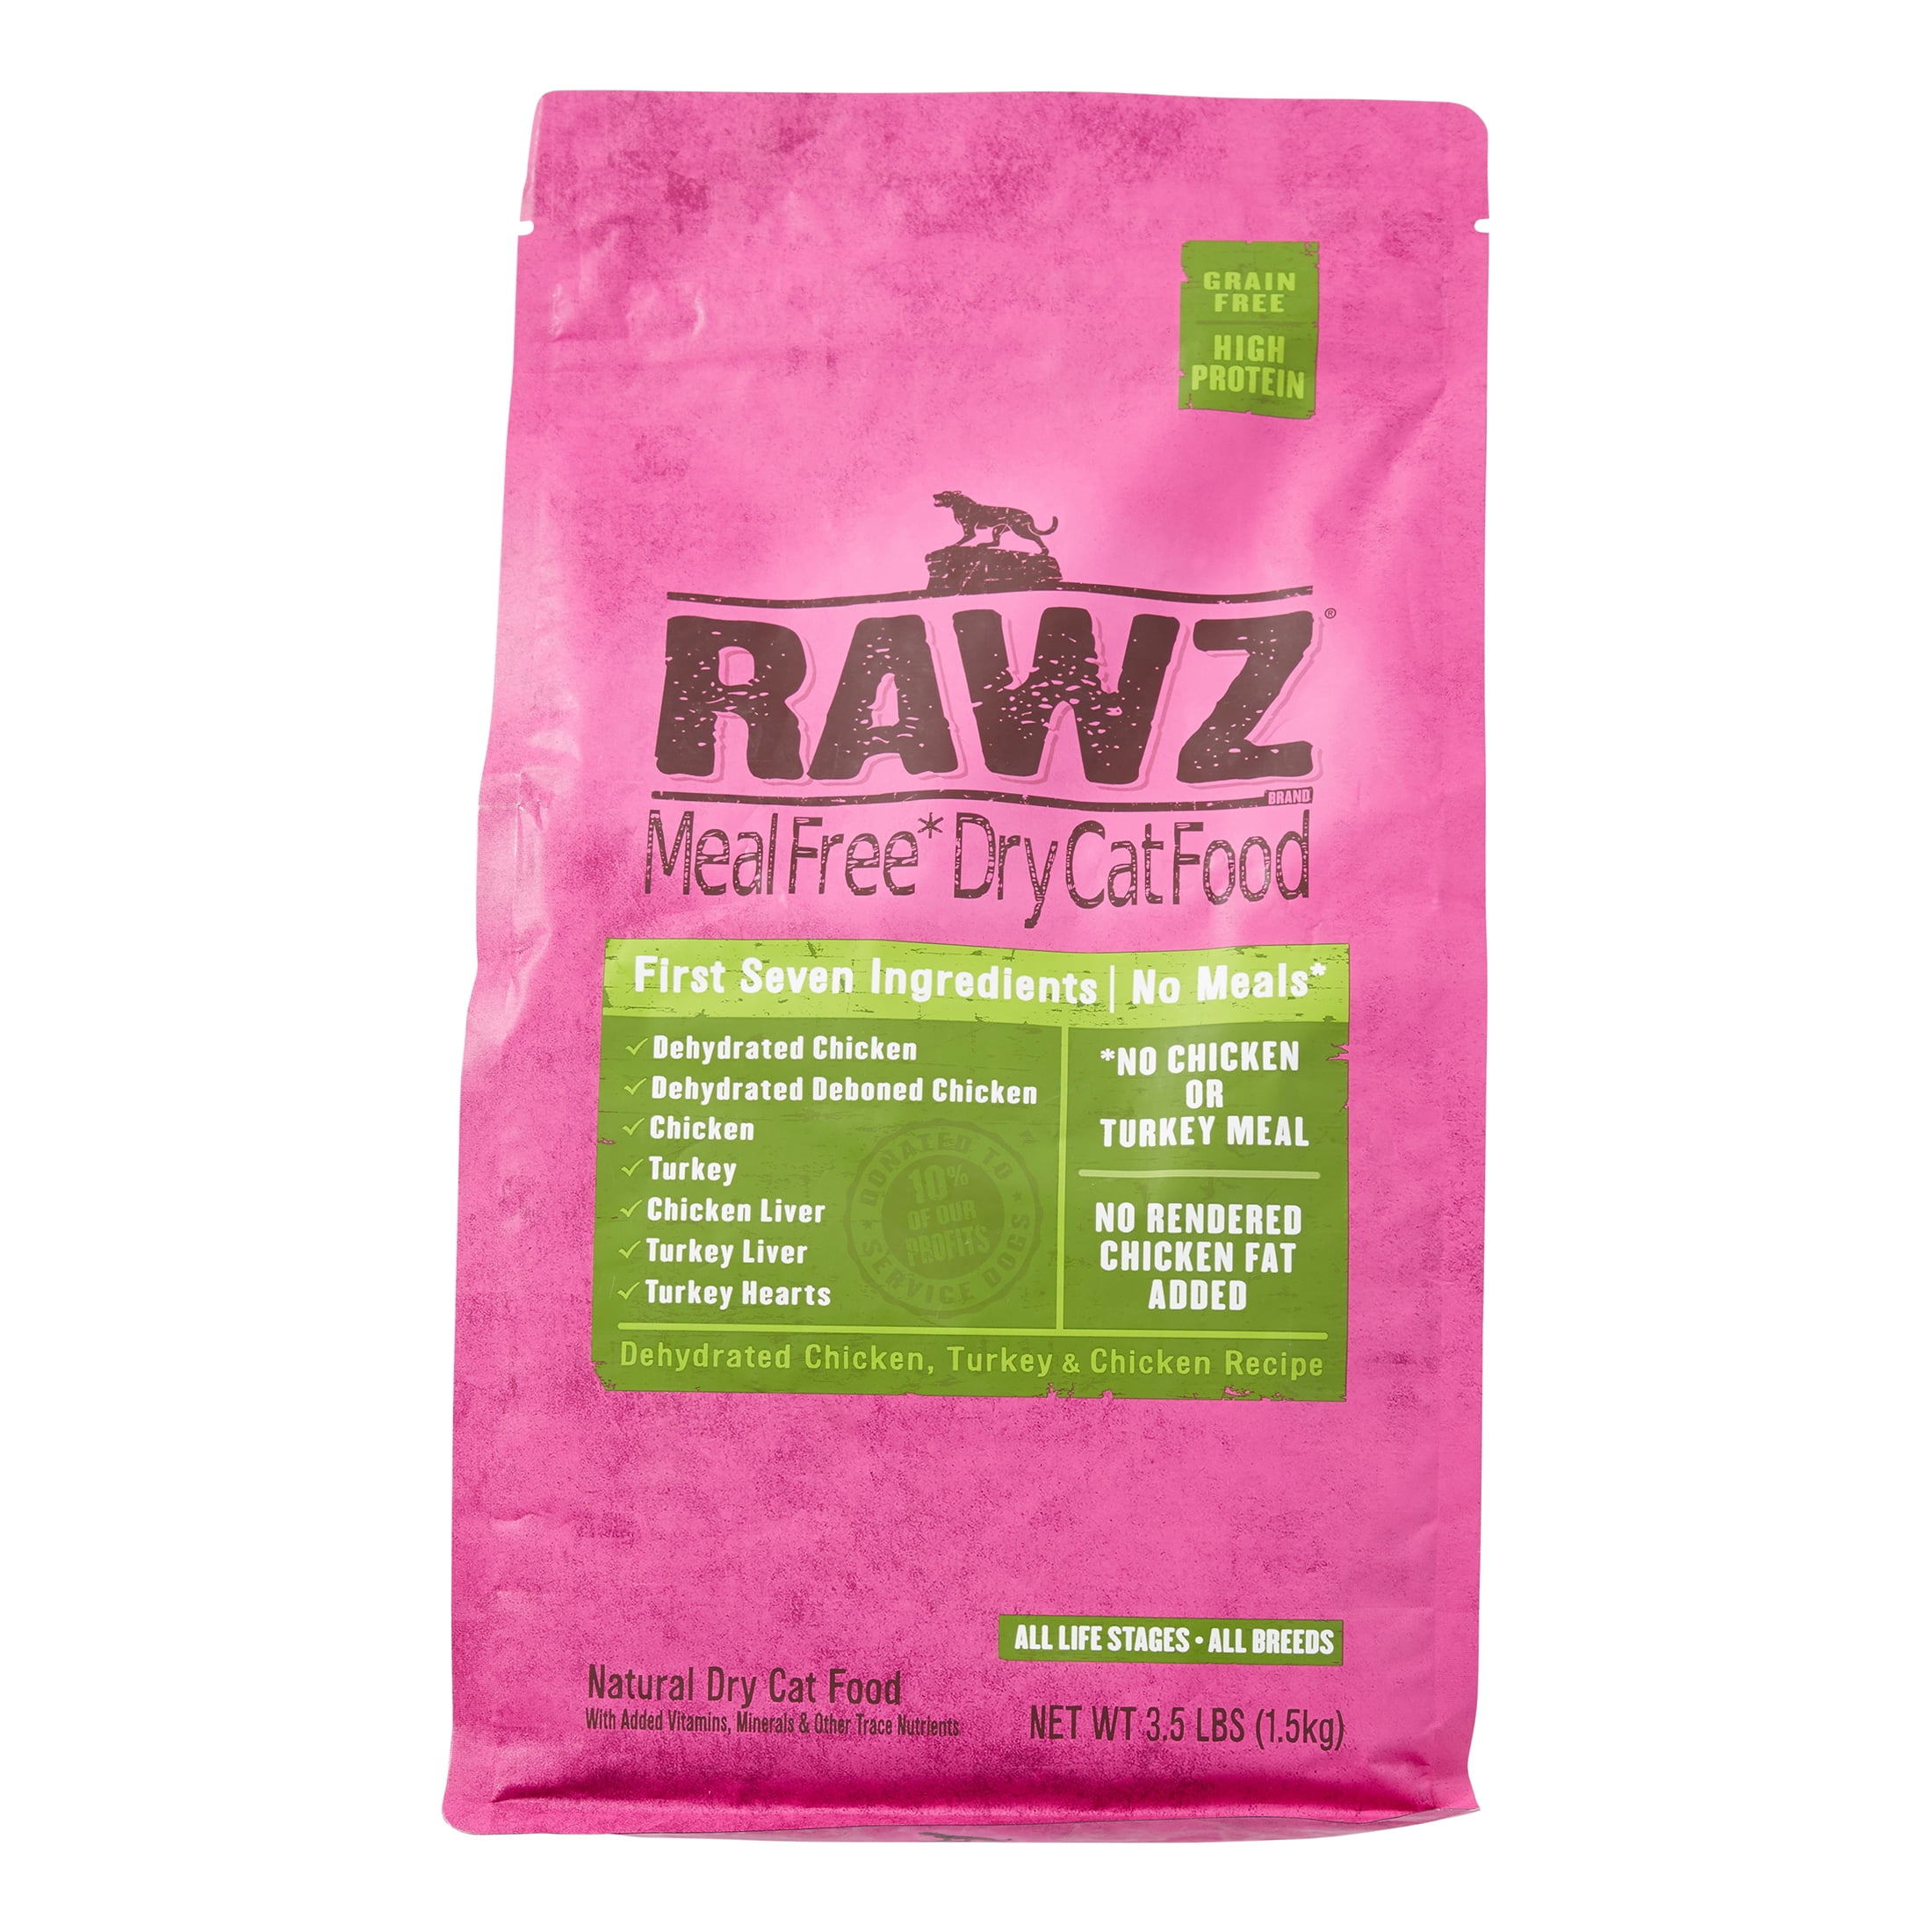 Rawz Natural GrainFree Chicken & Turkey All Life Stages Dry Cat Food